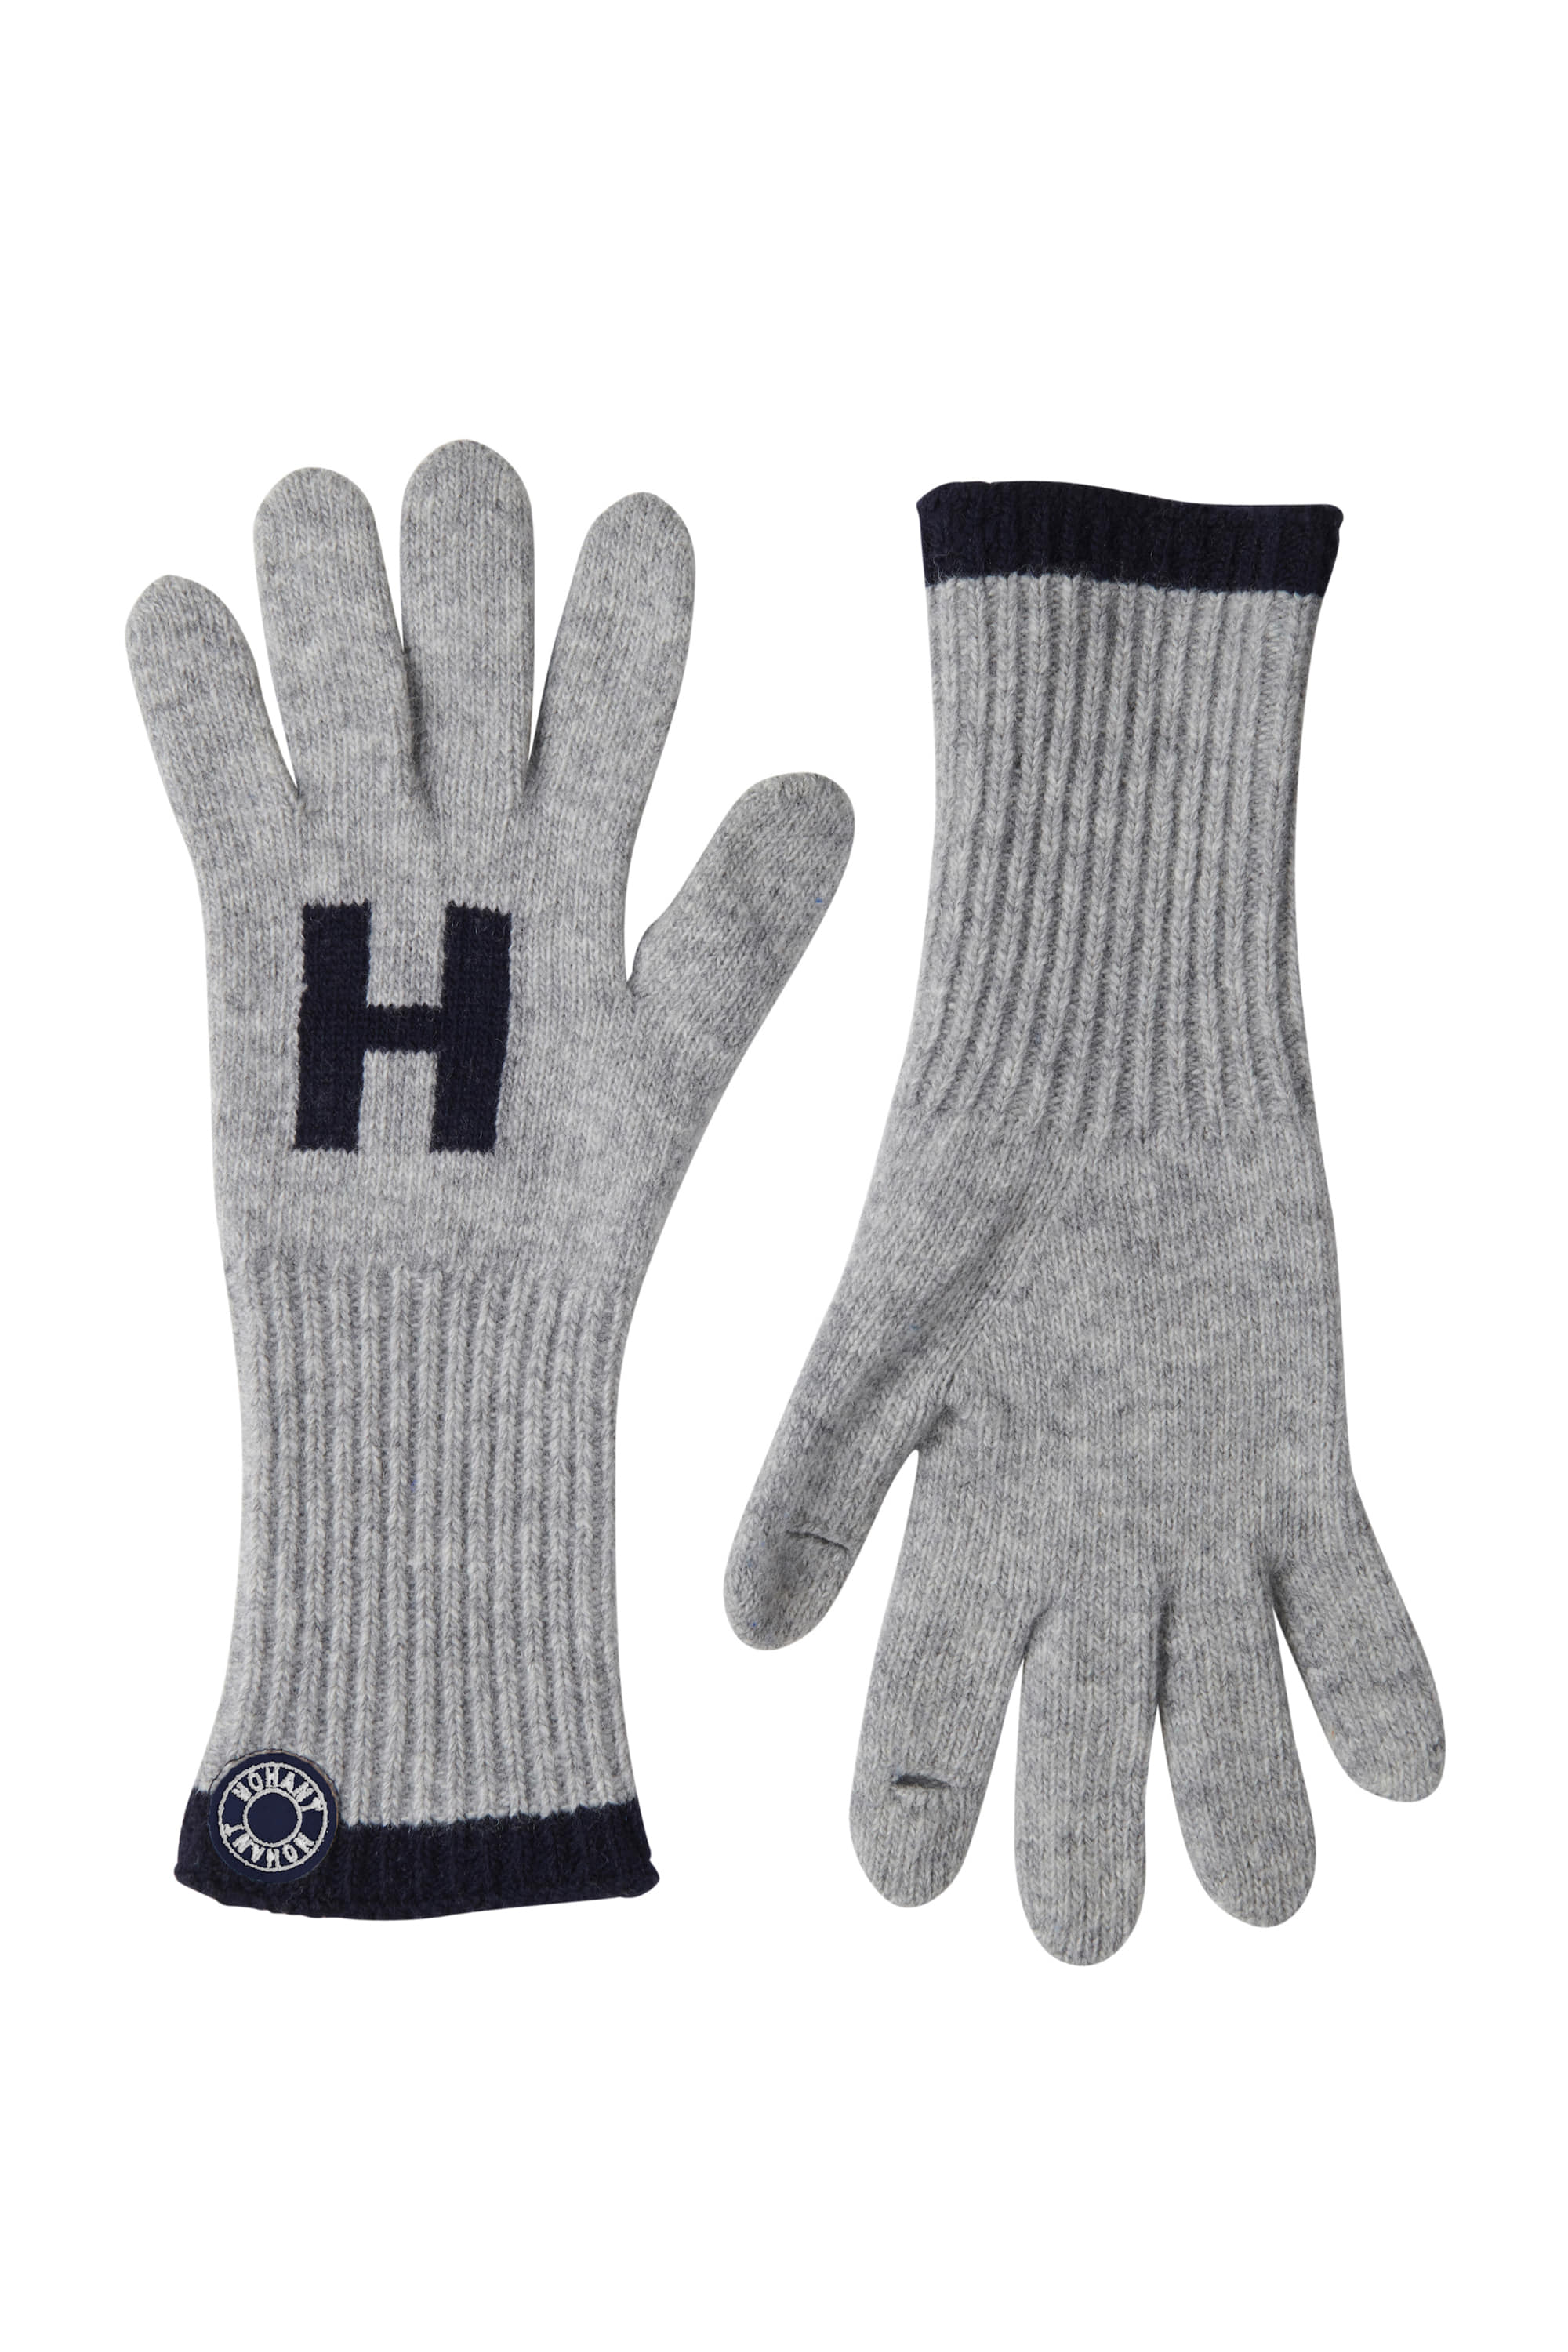 [CARRY OVER] LOGO PATCH KNIT GLOVES GRAY